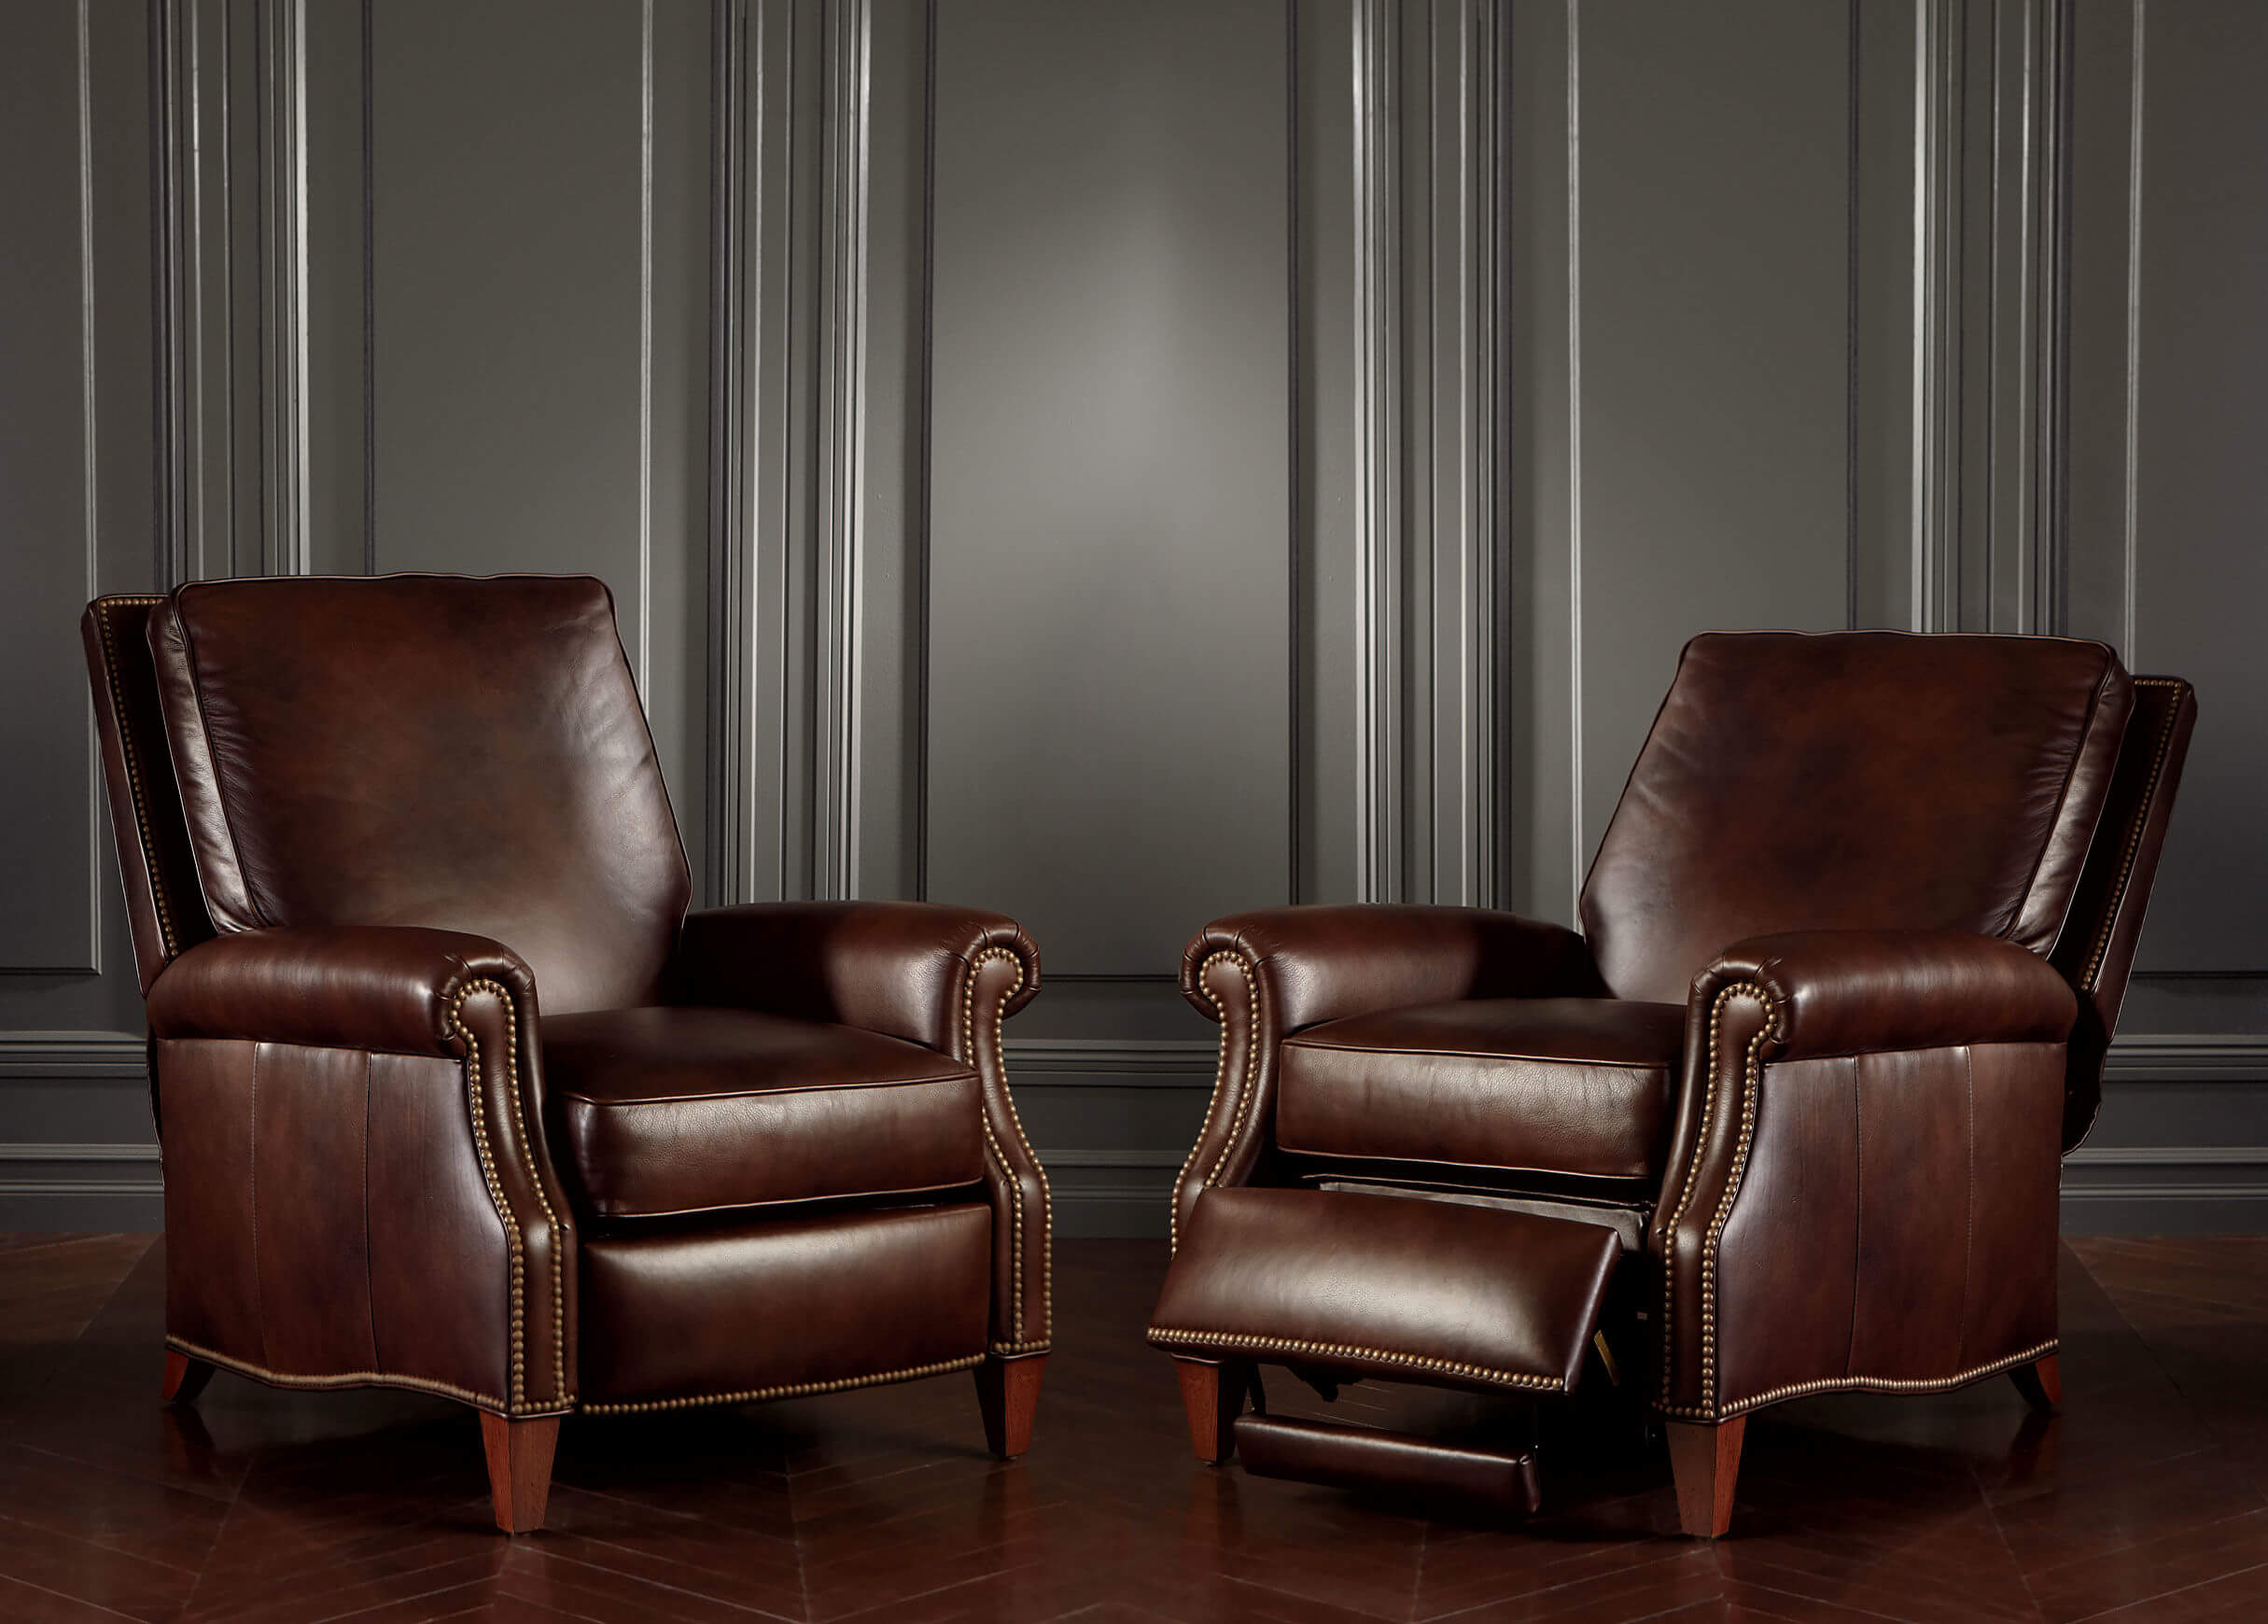 Luxury Leather Arm Chair Recliners, Leather Lounge Chairs Recliners